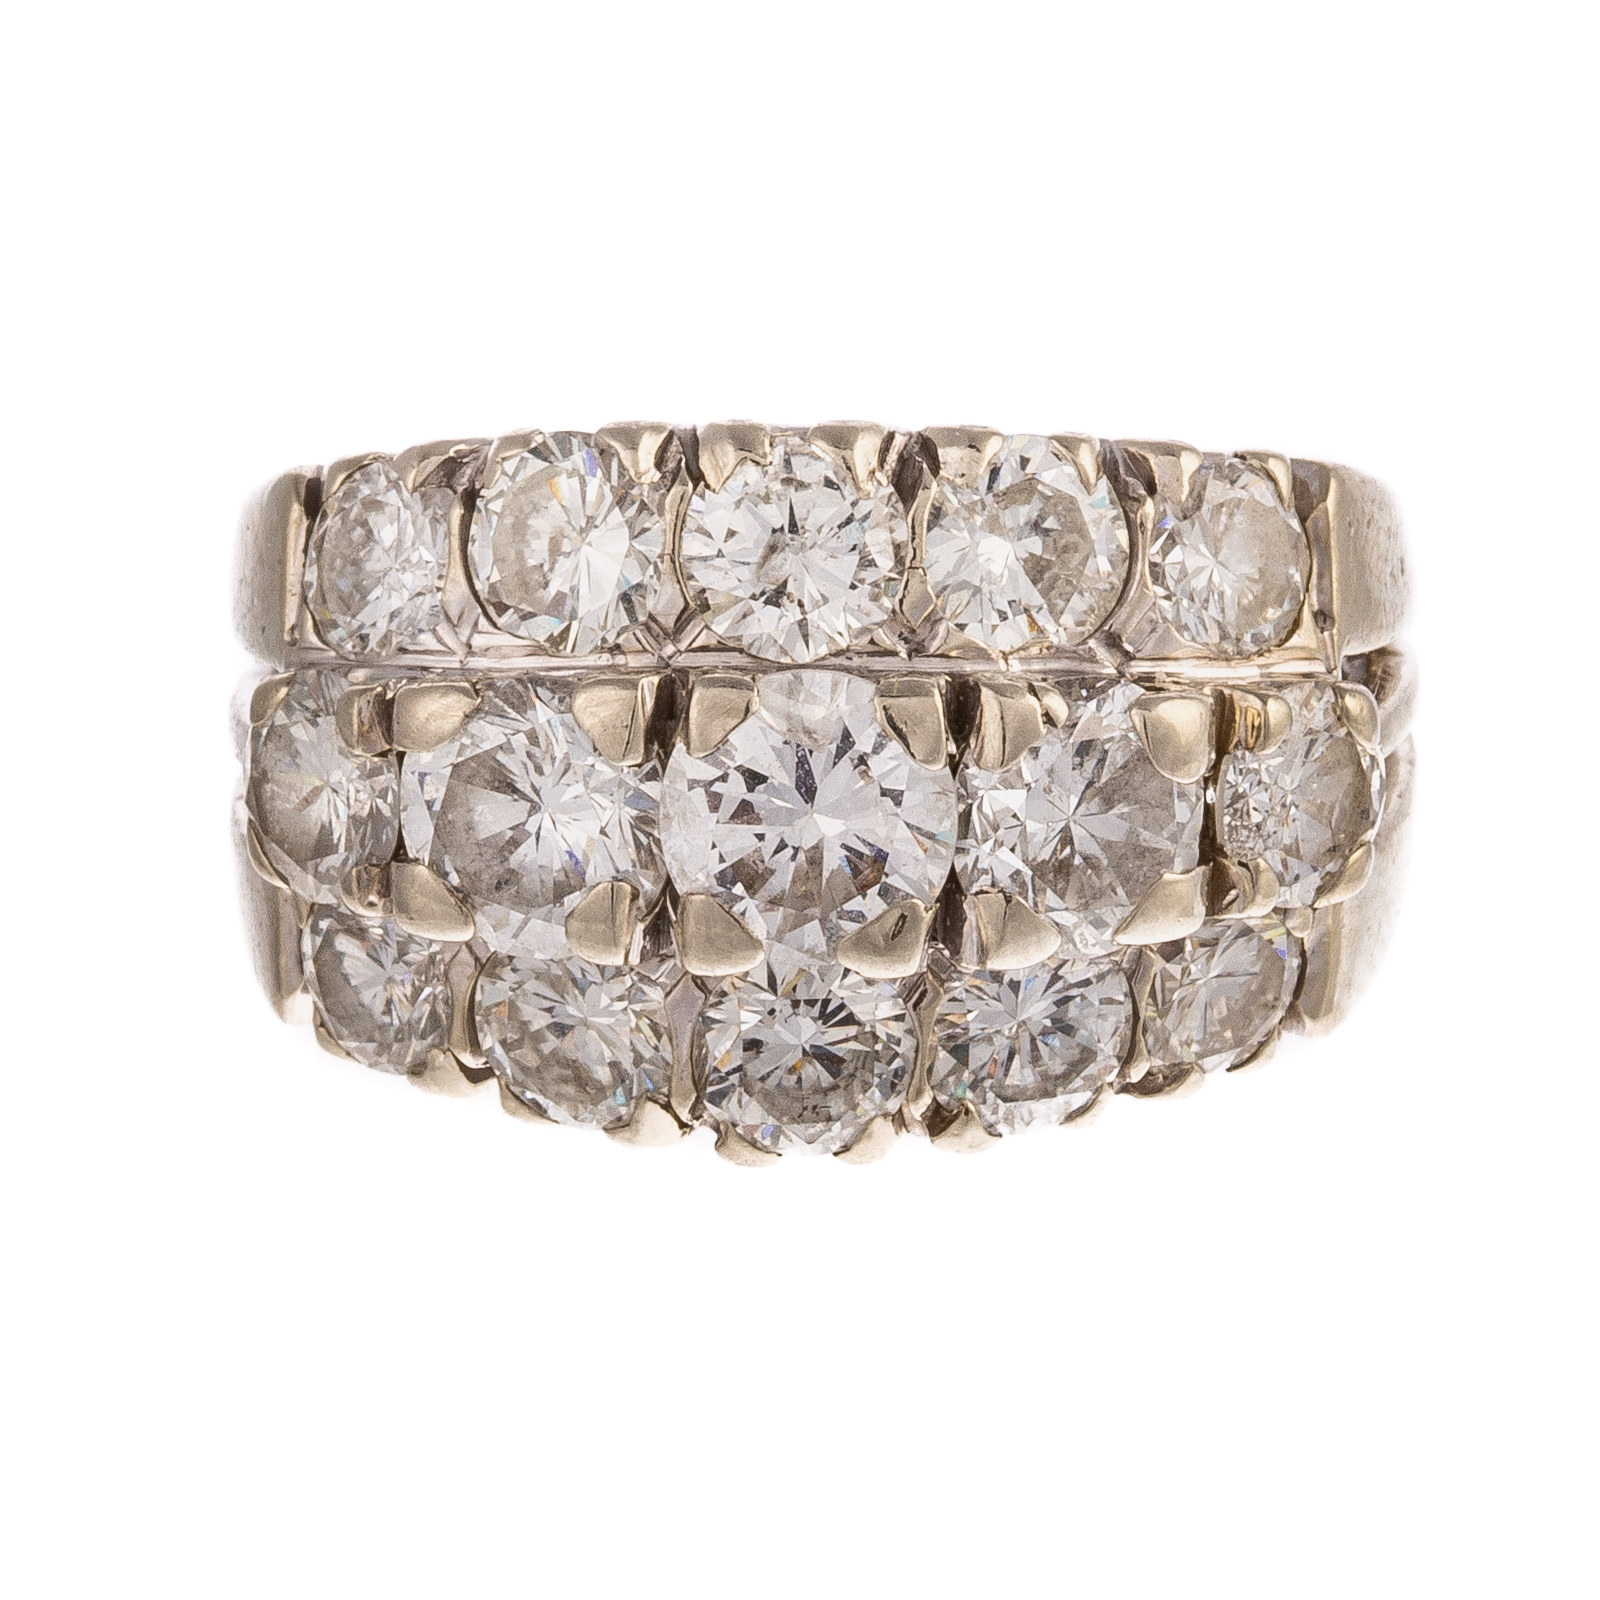 A WIDE 4 00 CTW DIAMOND BAND IN 2878dd